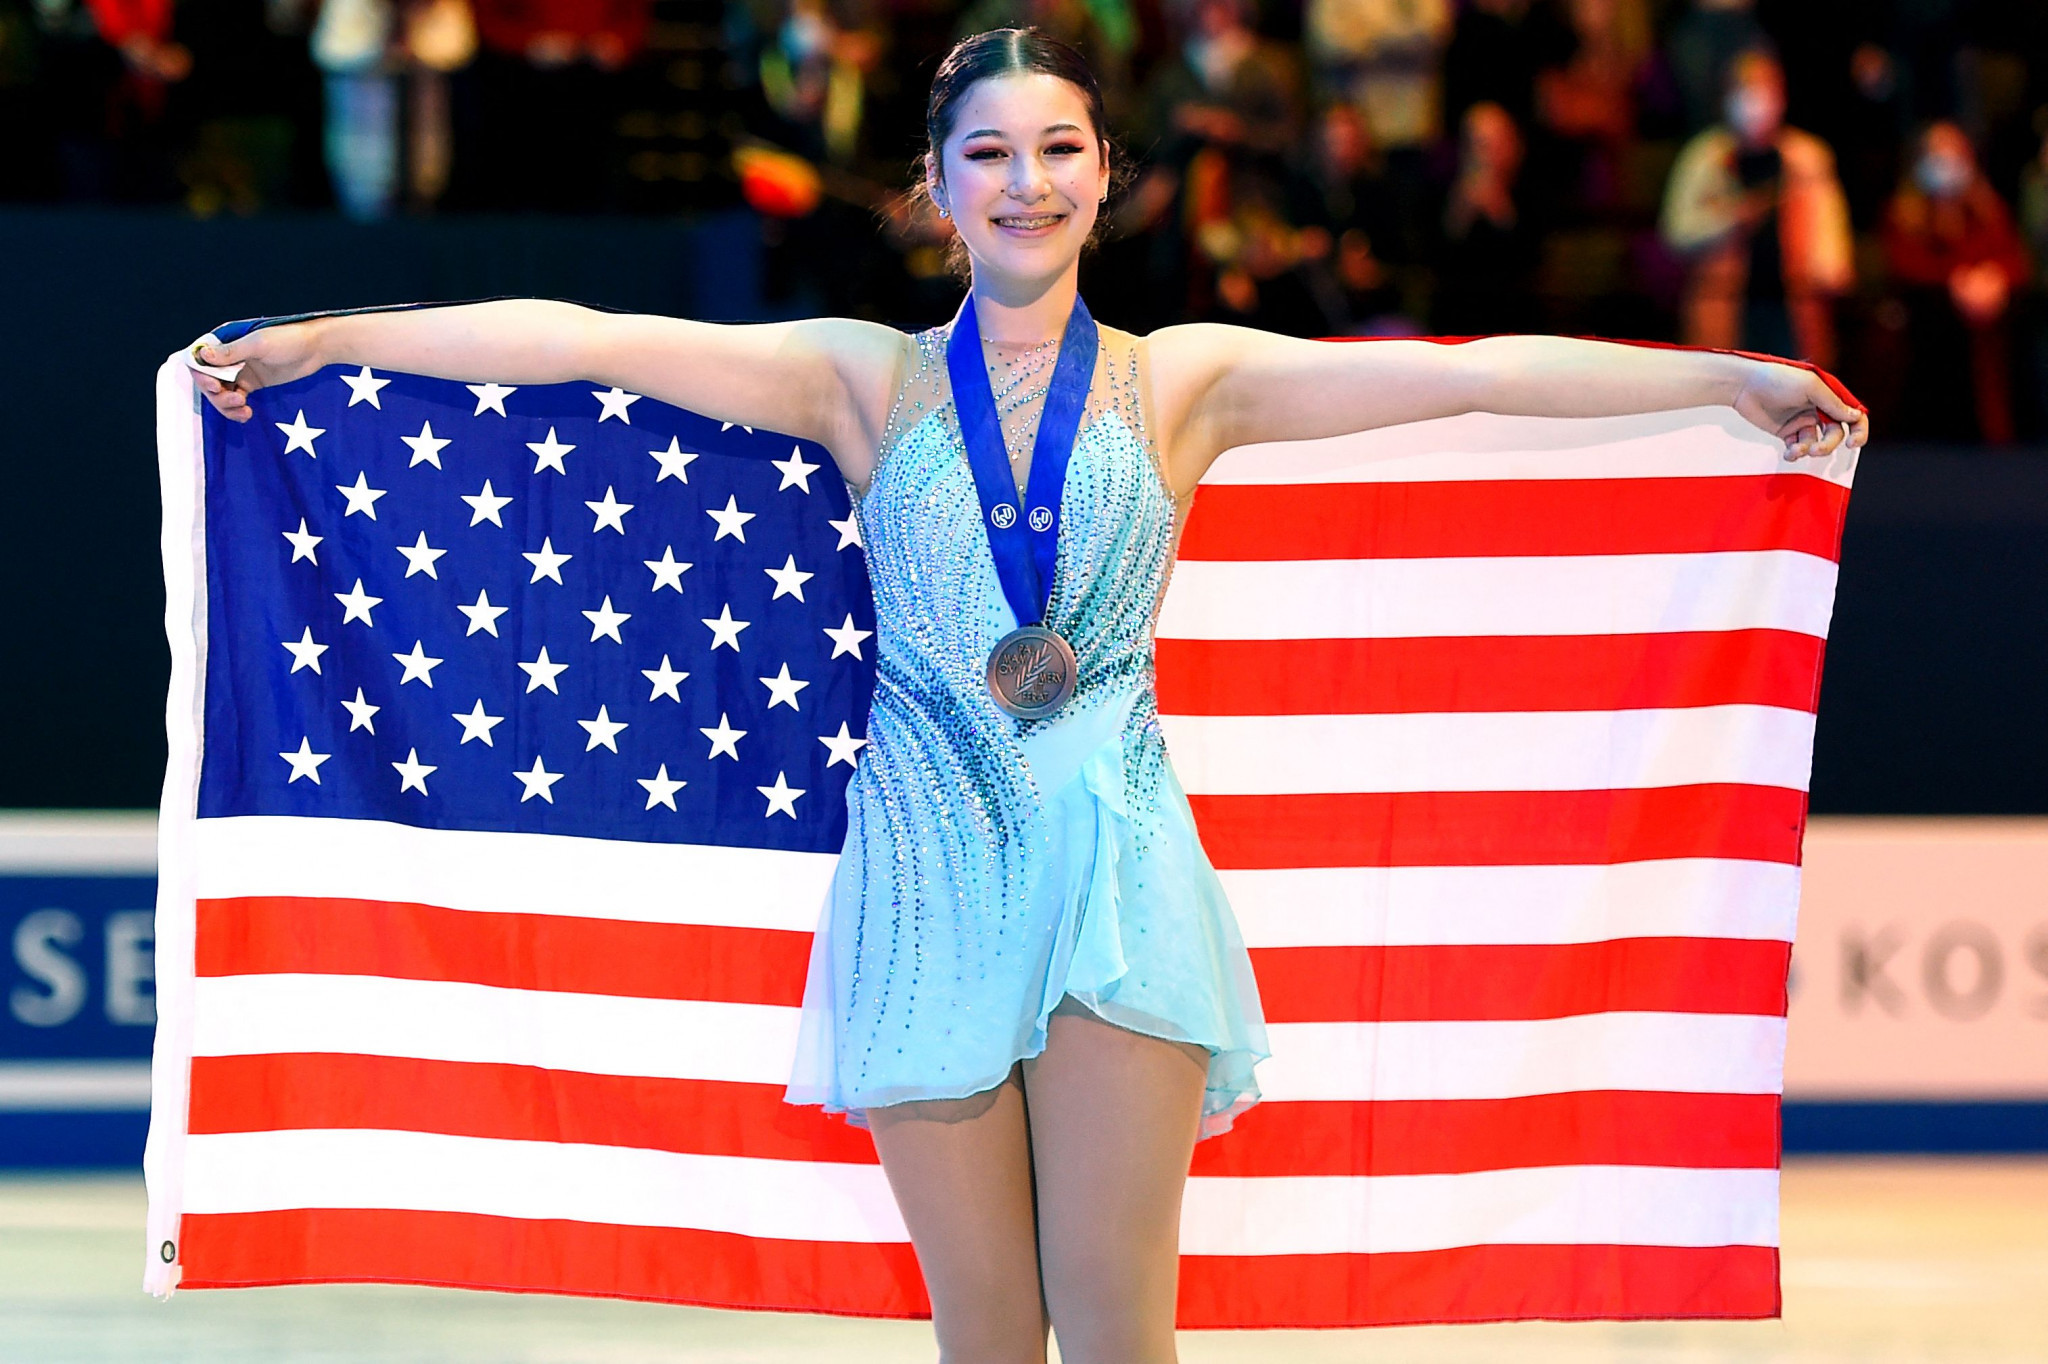 Alysa Liu won bronze in the women's singles at the World Figure Skating Championships last month ©Getty Images